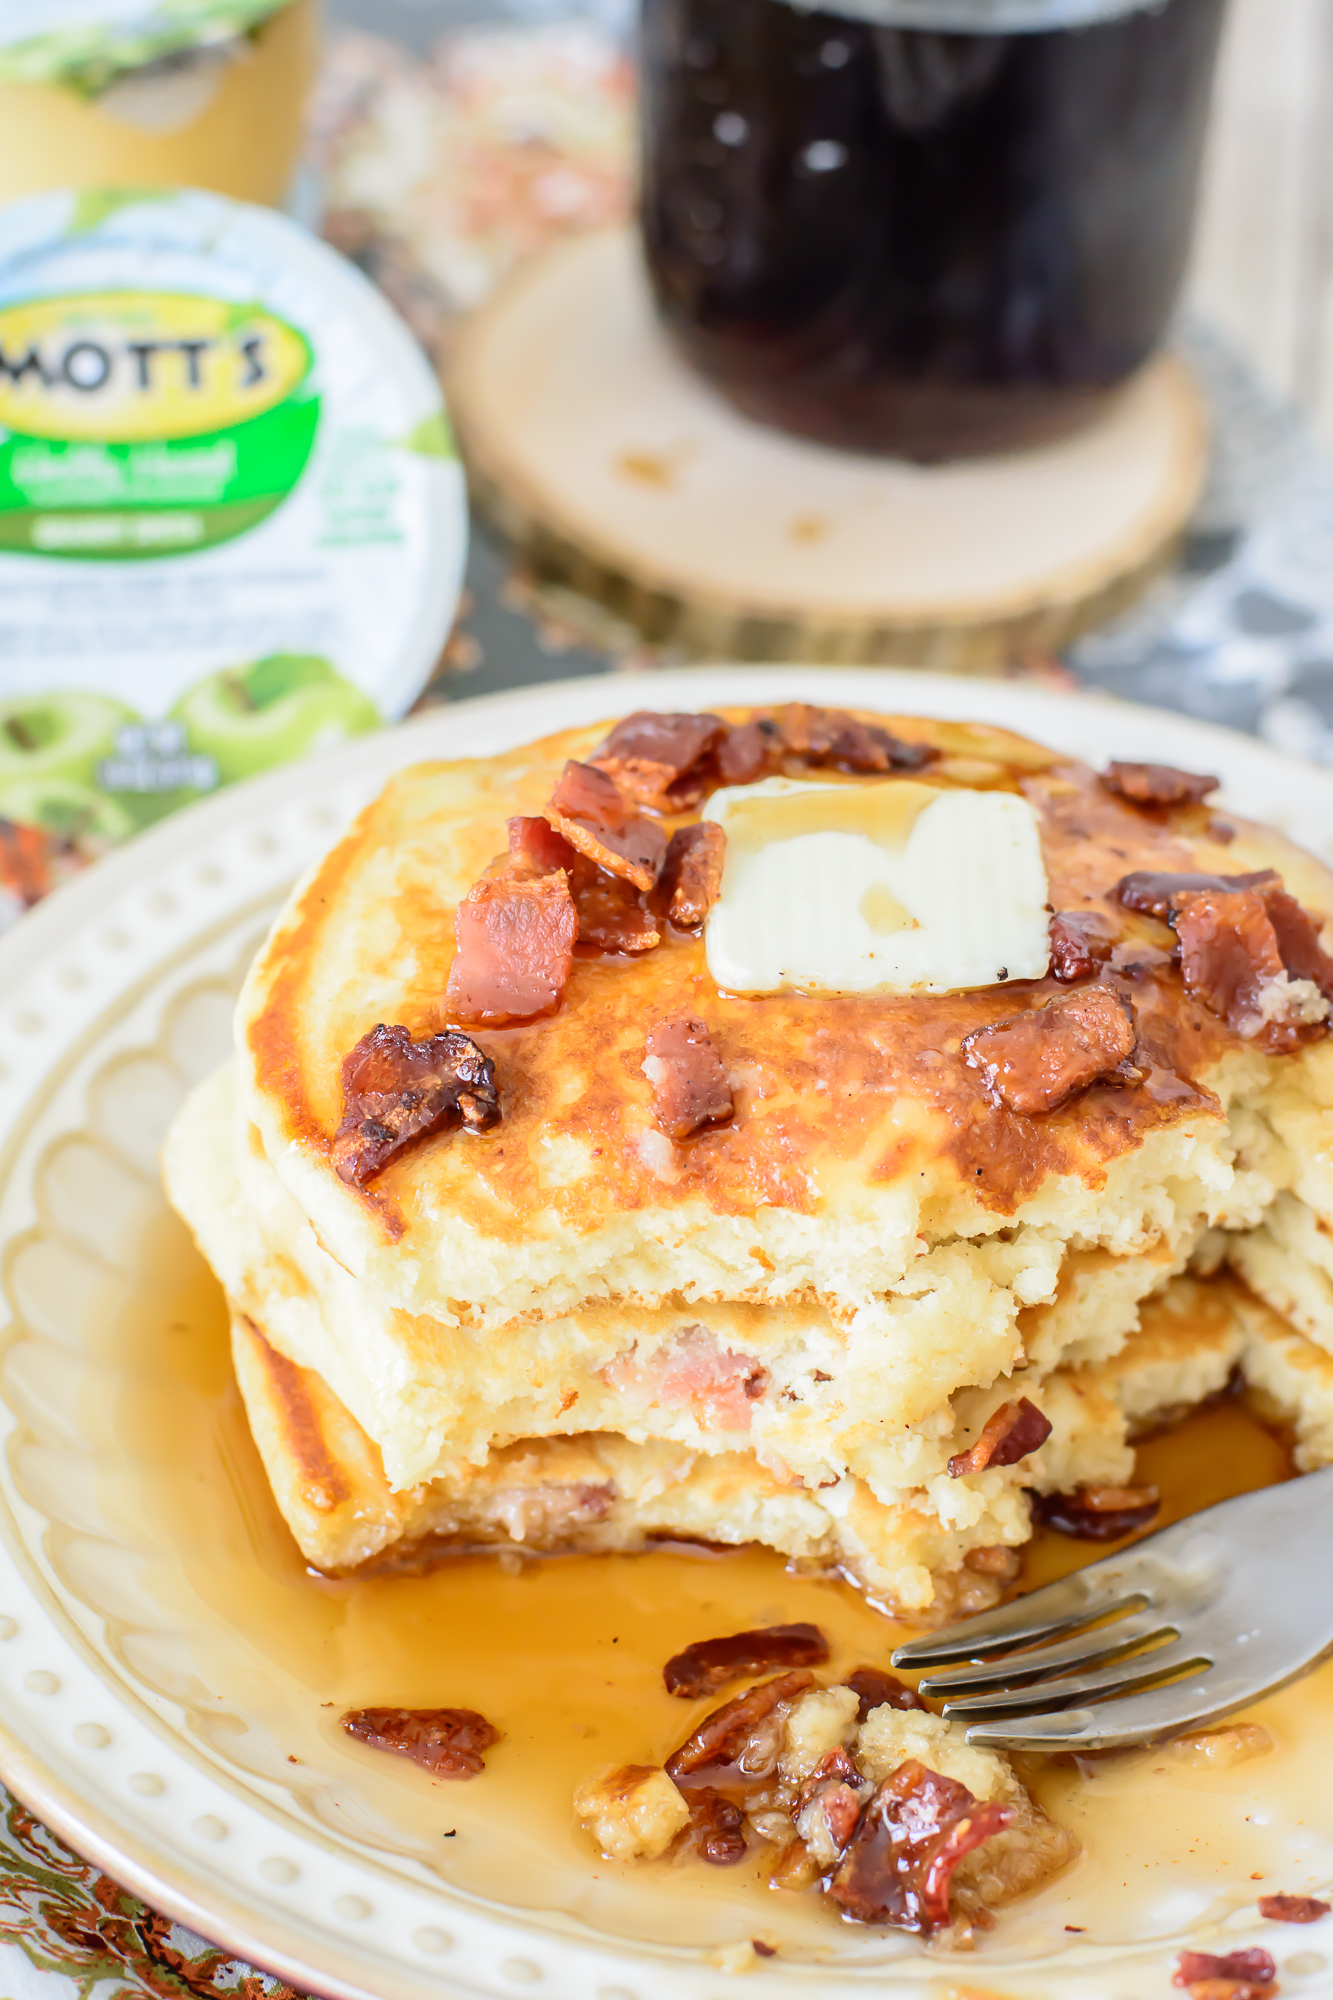 Maple Bacon Pancakes. Light and fluffy pancakes with pure maple syrup and crispy bacon. This pancake recipe is the king of all pancake recipes. You will love every bite!